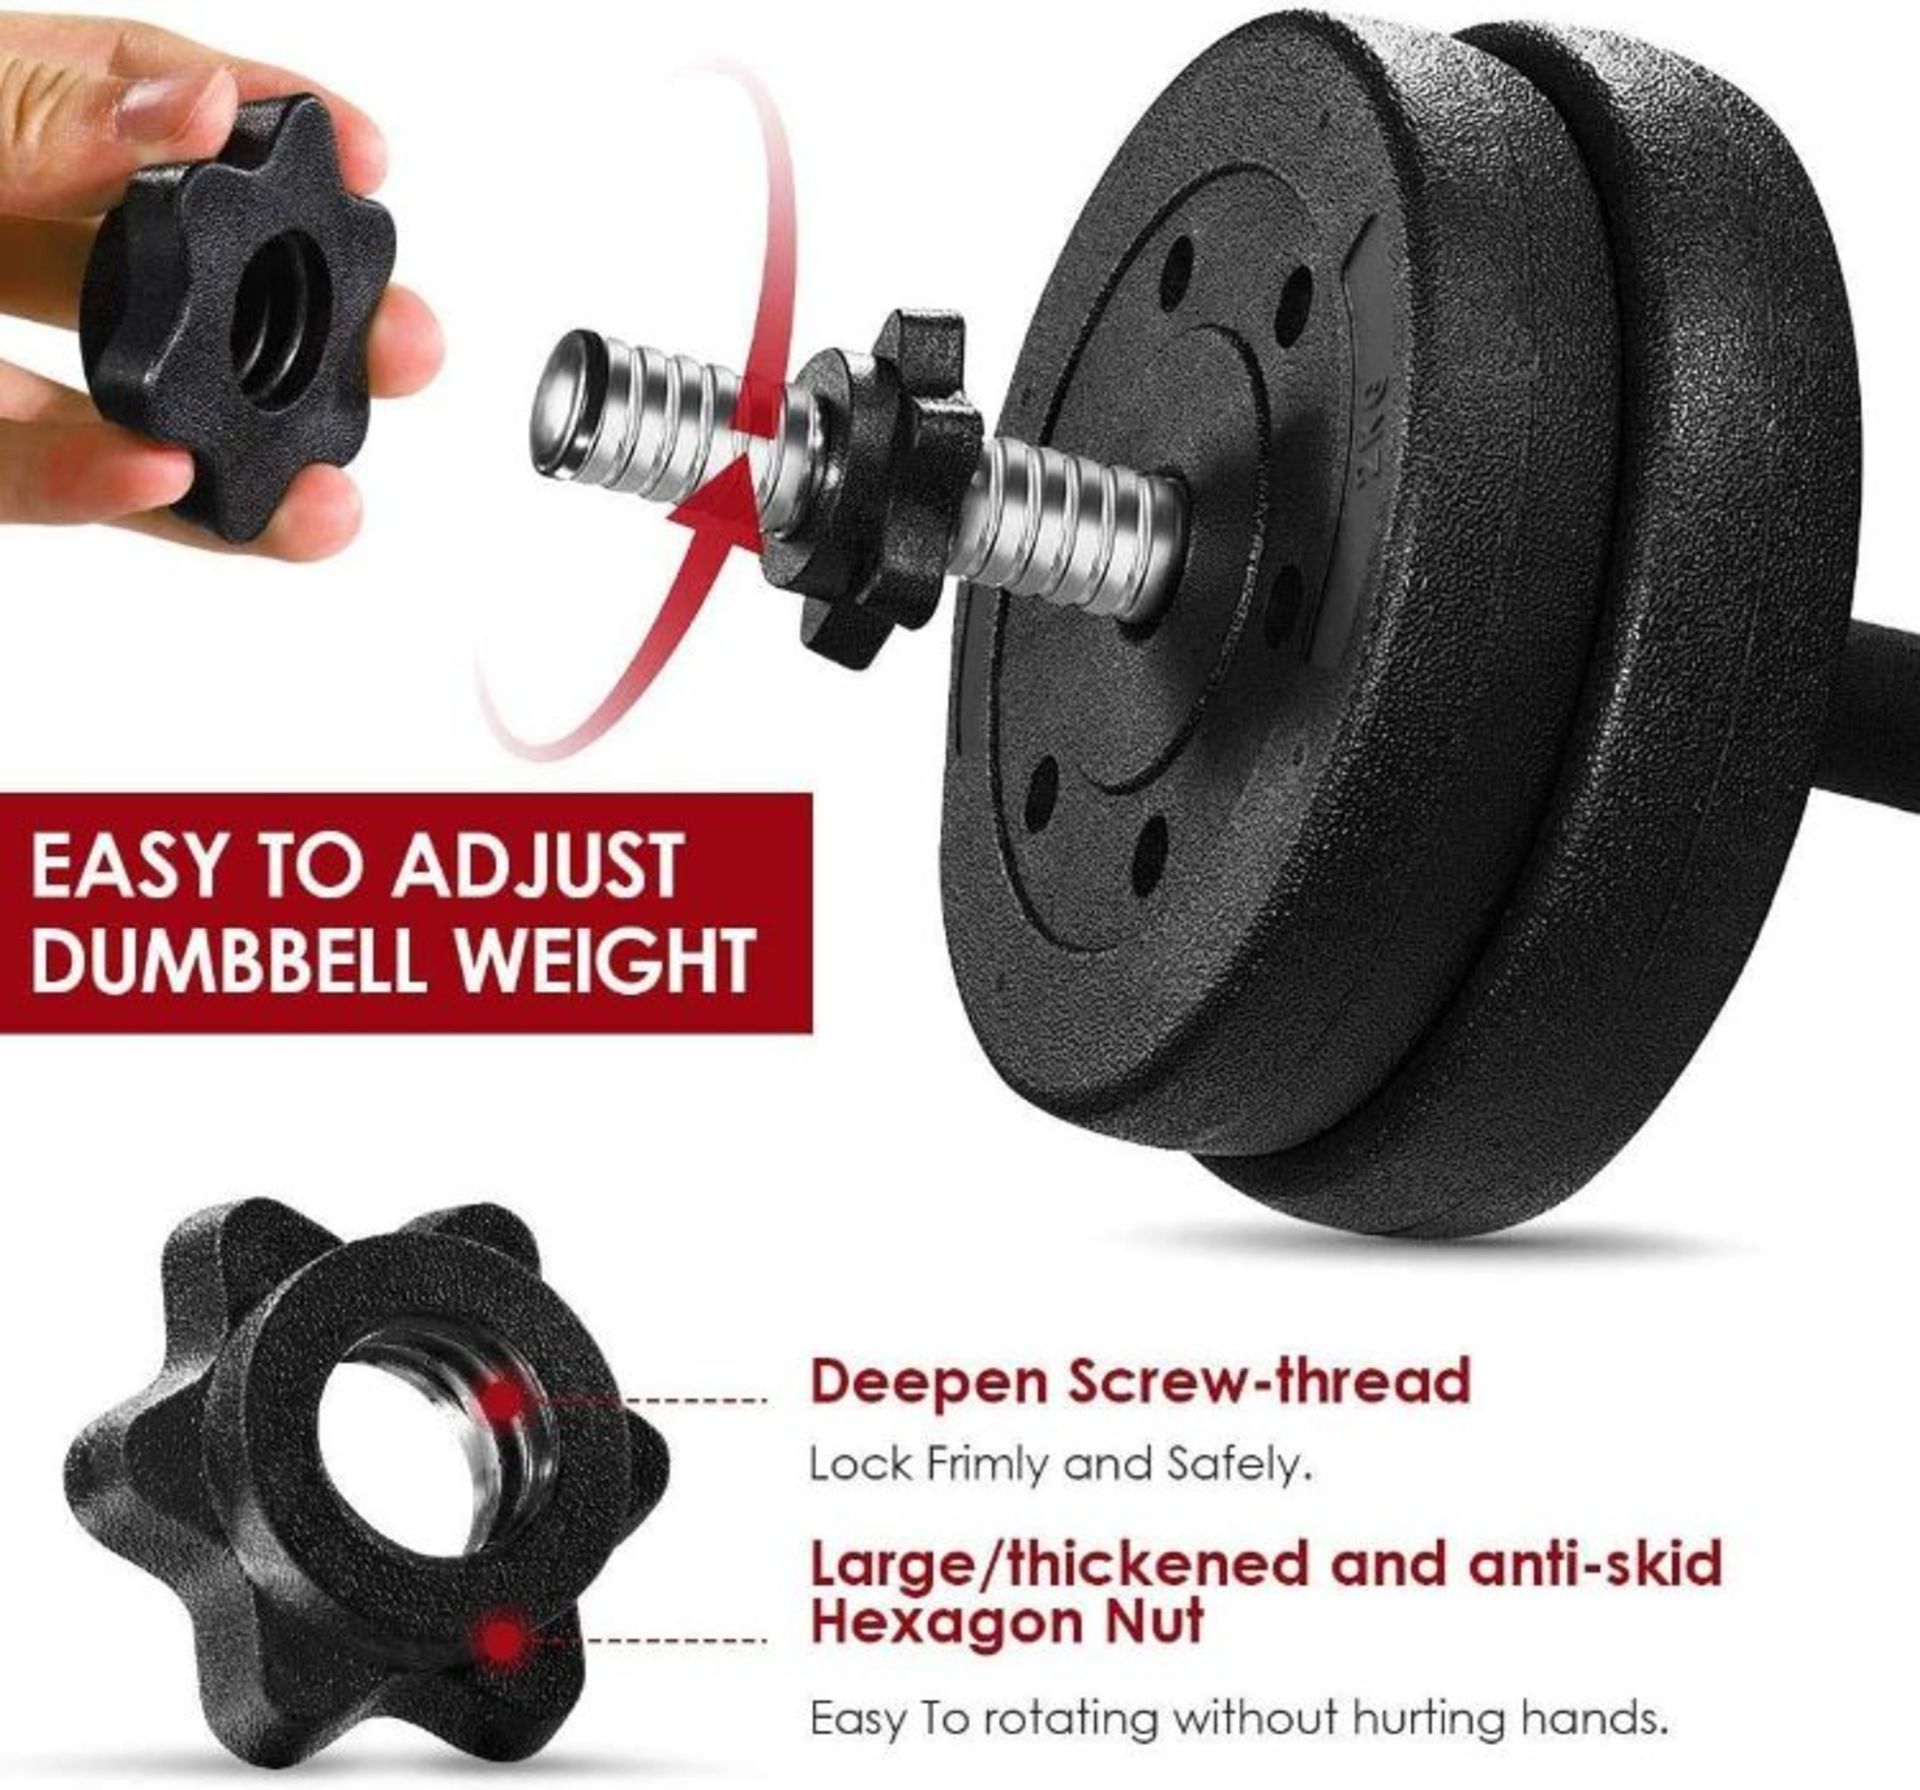 10x Movtotop 30KG adjustable Dumb Bell weight set, new and boxed, we can only find these in - Image 3 of 6